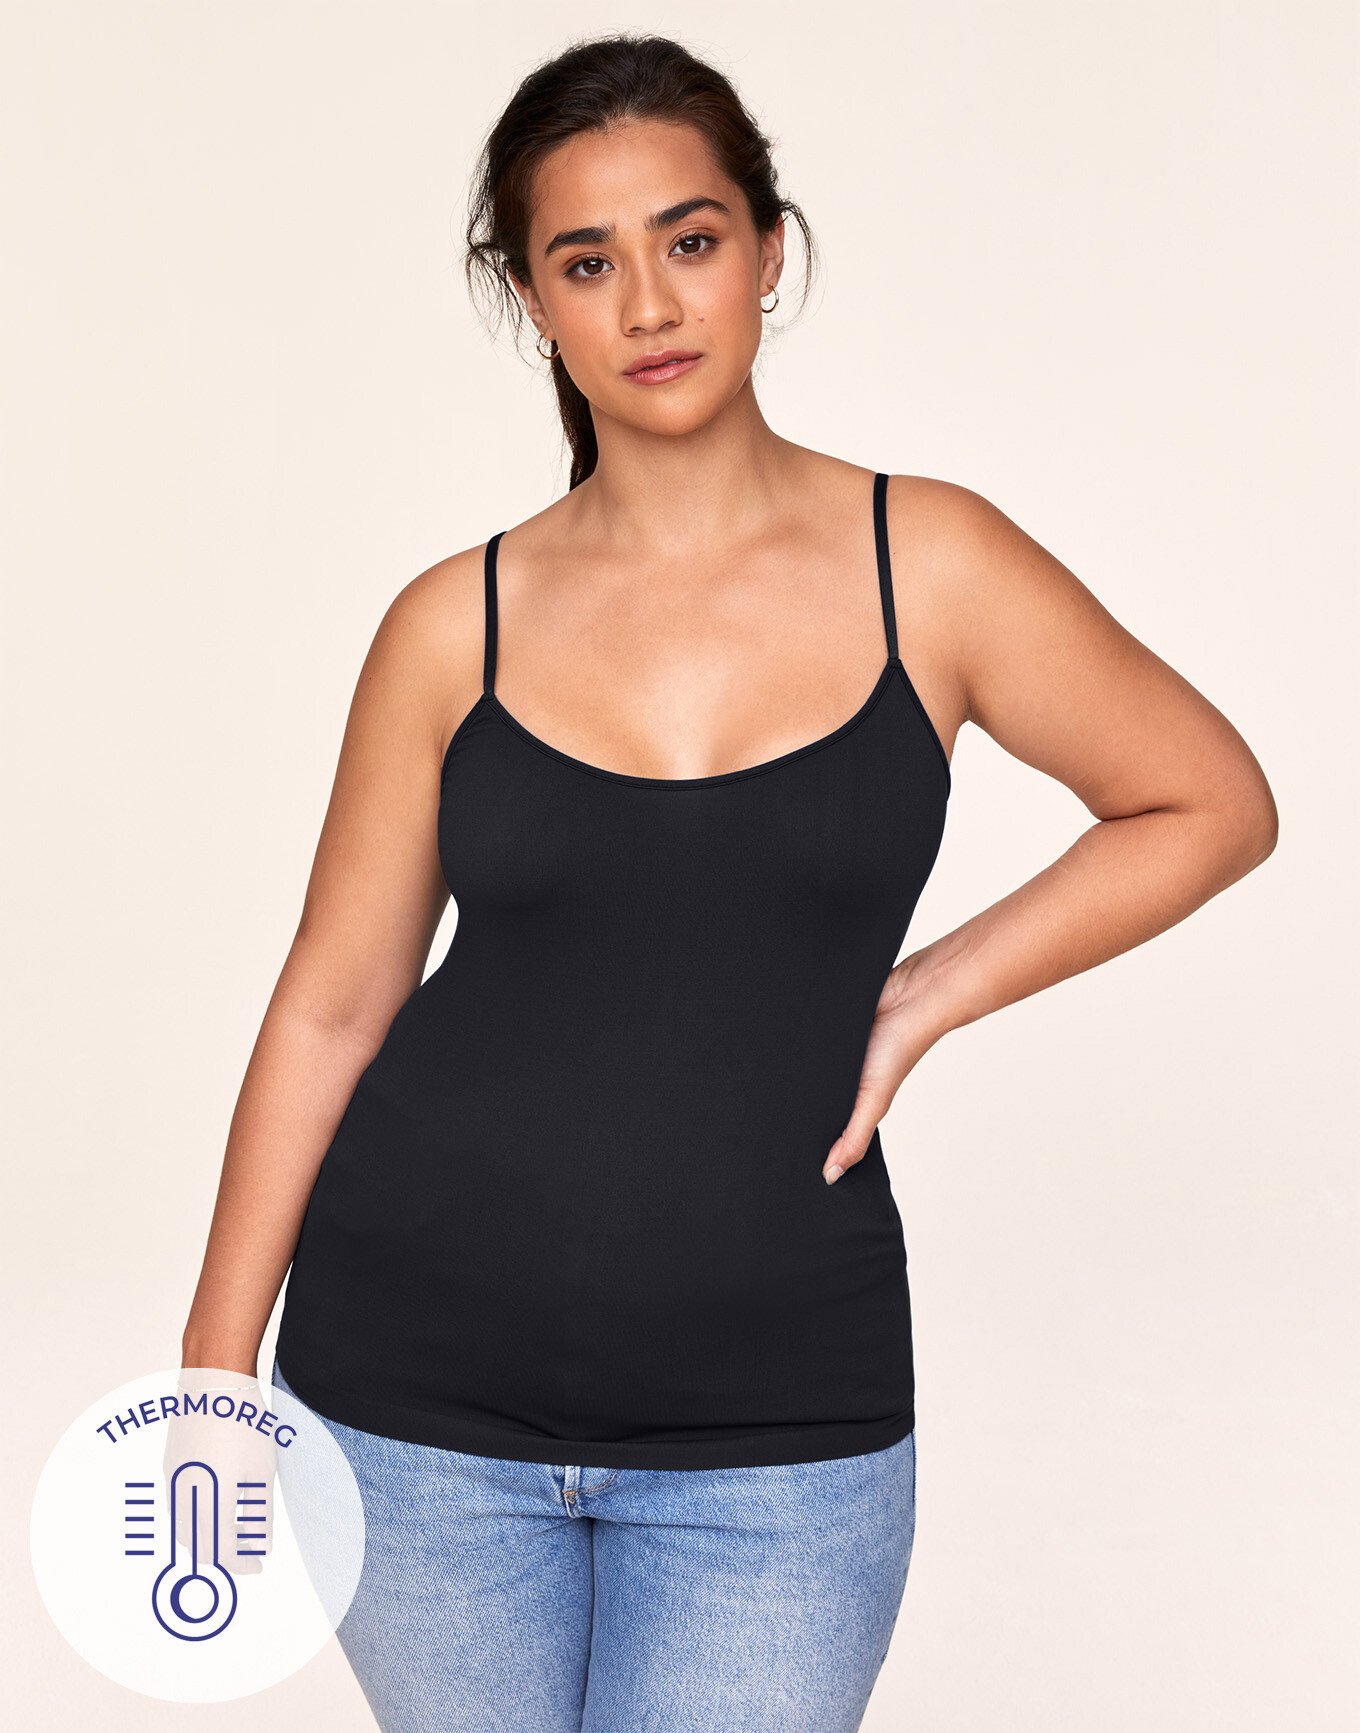 Women's Plus-Size Camisole Plus Size Tank Top with Built in Bra